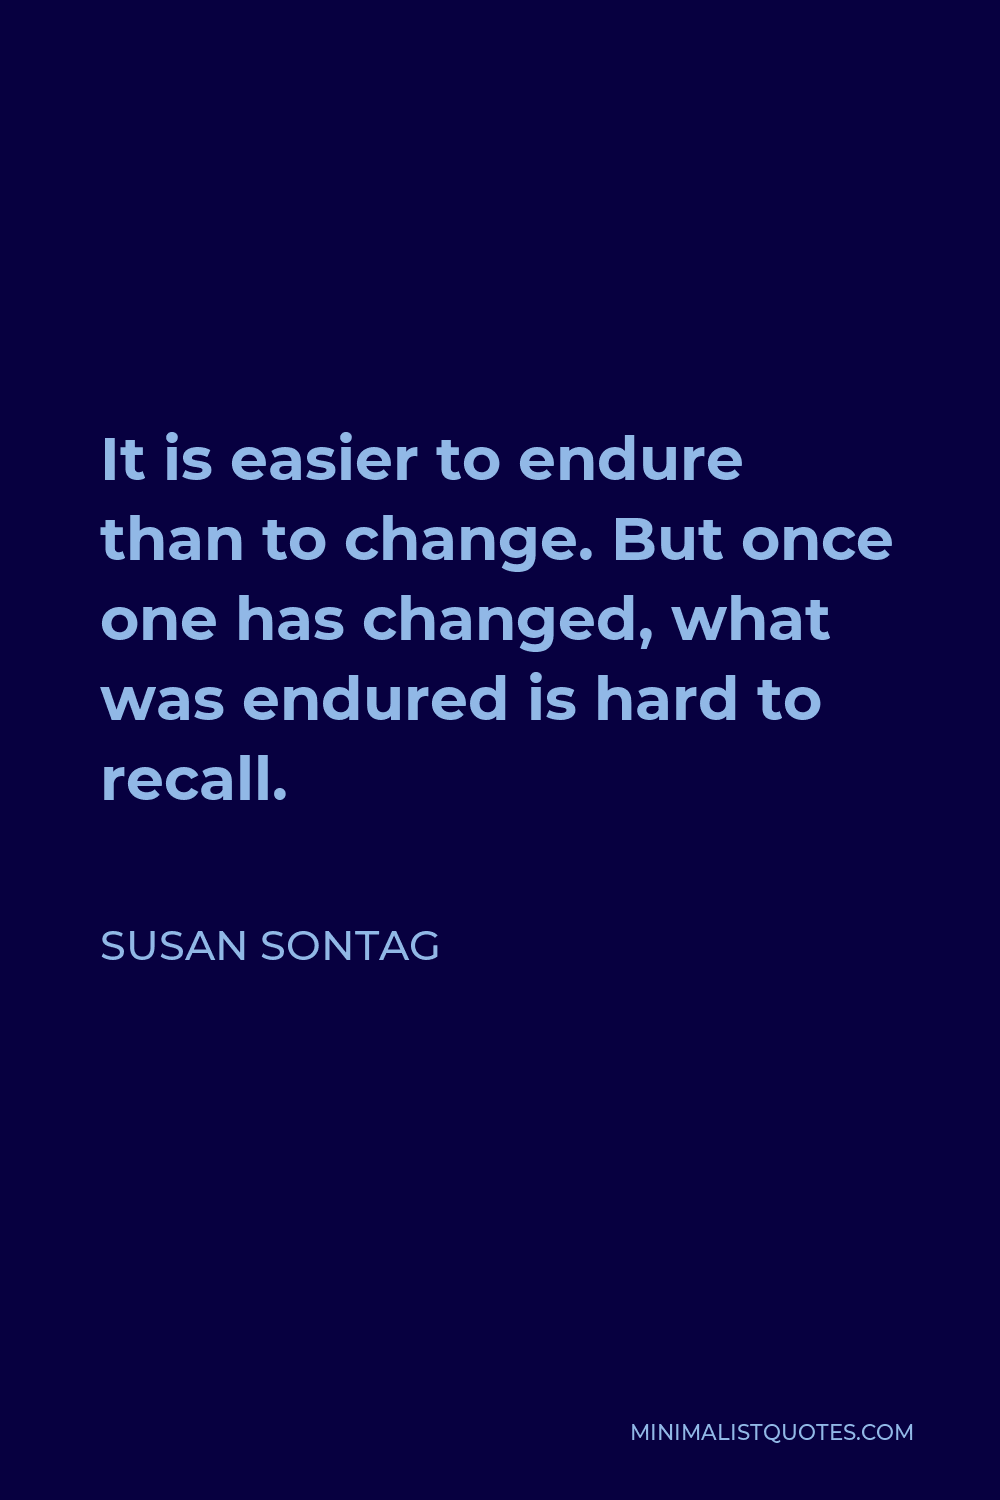 Susan Sontag Quote - It is easier to endure than to change. But once one has changed, what was endured is hard to recall.